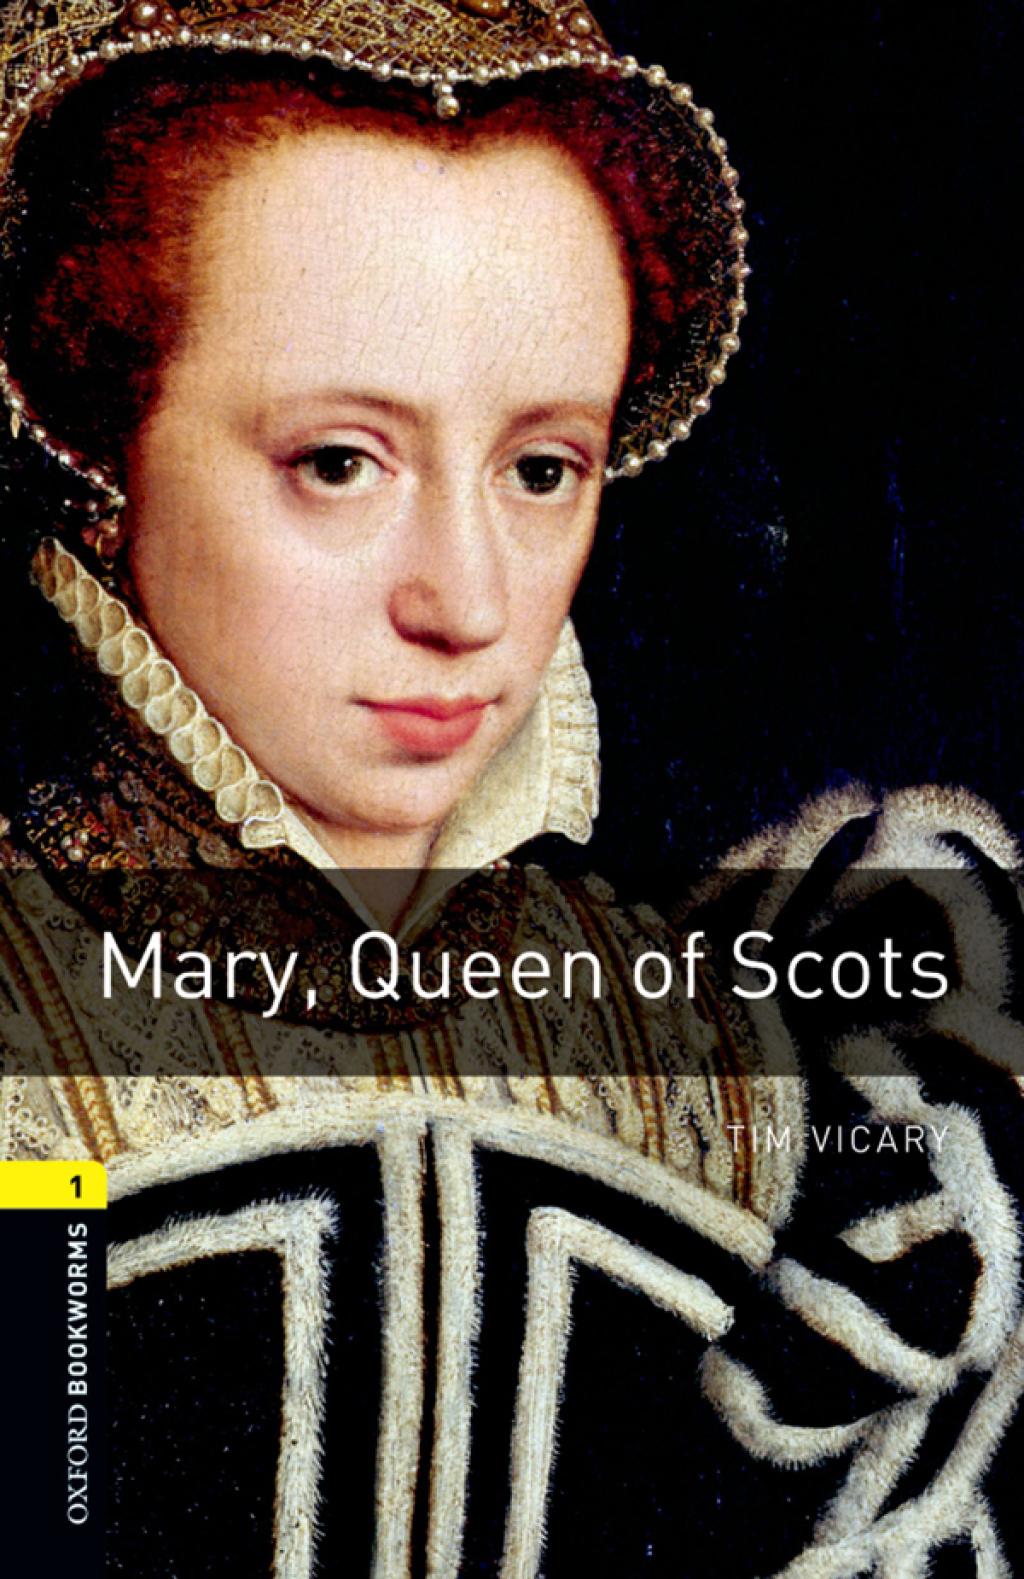 Mary Queen of Scots Level 1 Oxford Bookworms Library - 3rd Edition (eBook Rental)